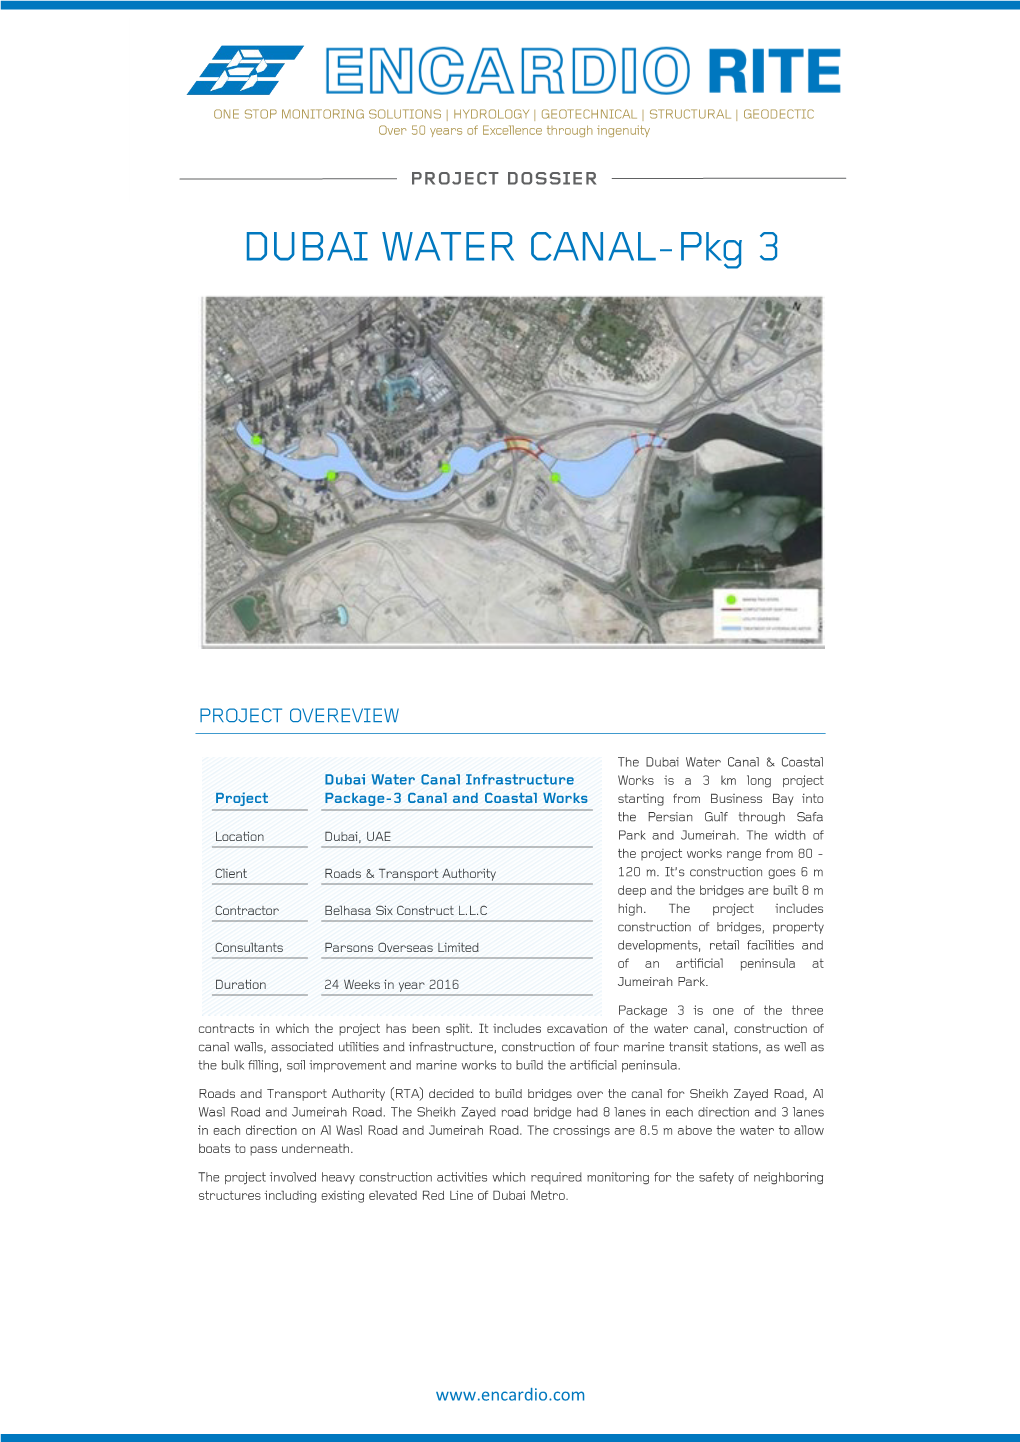 Dubai Water Canal Infrastructure Package-3 (UAE)